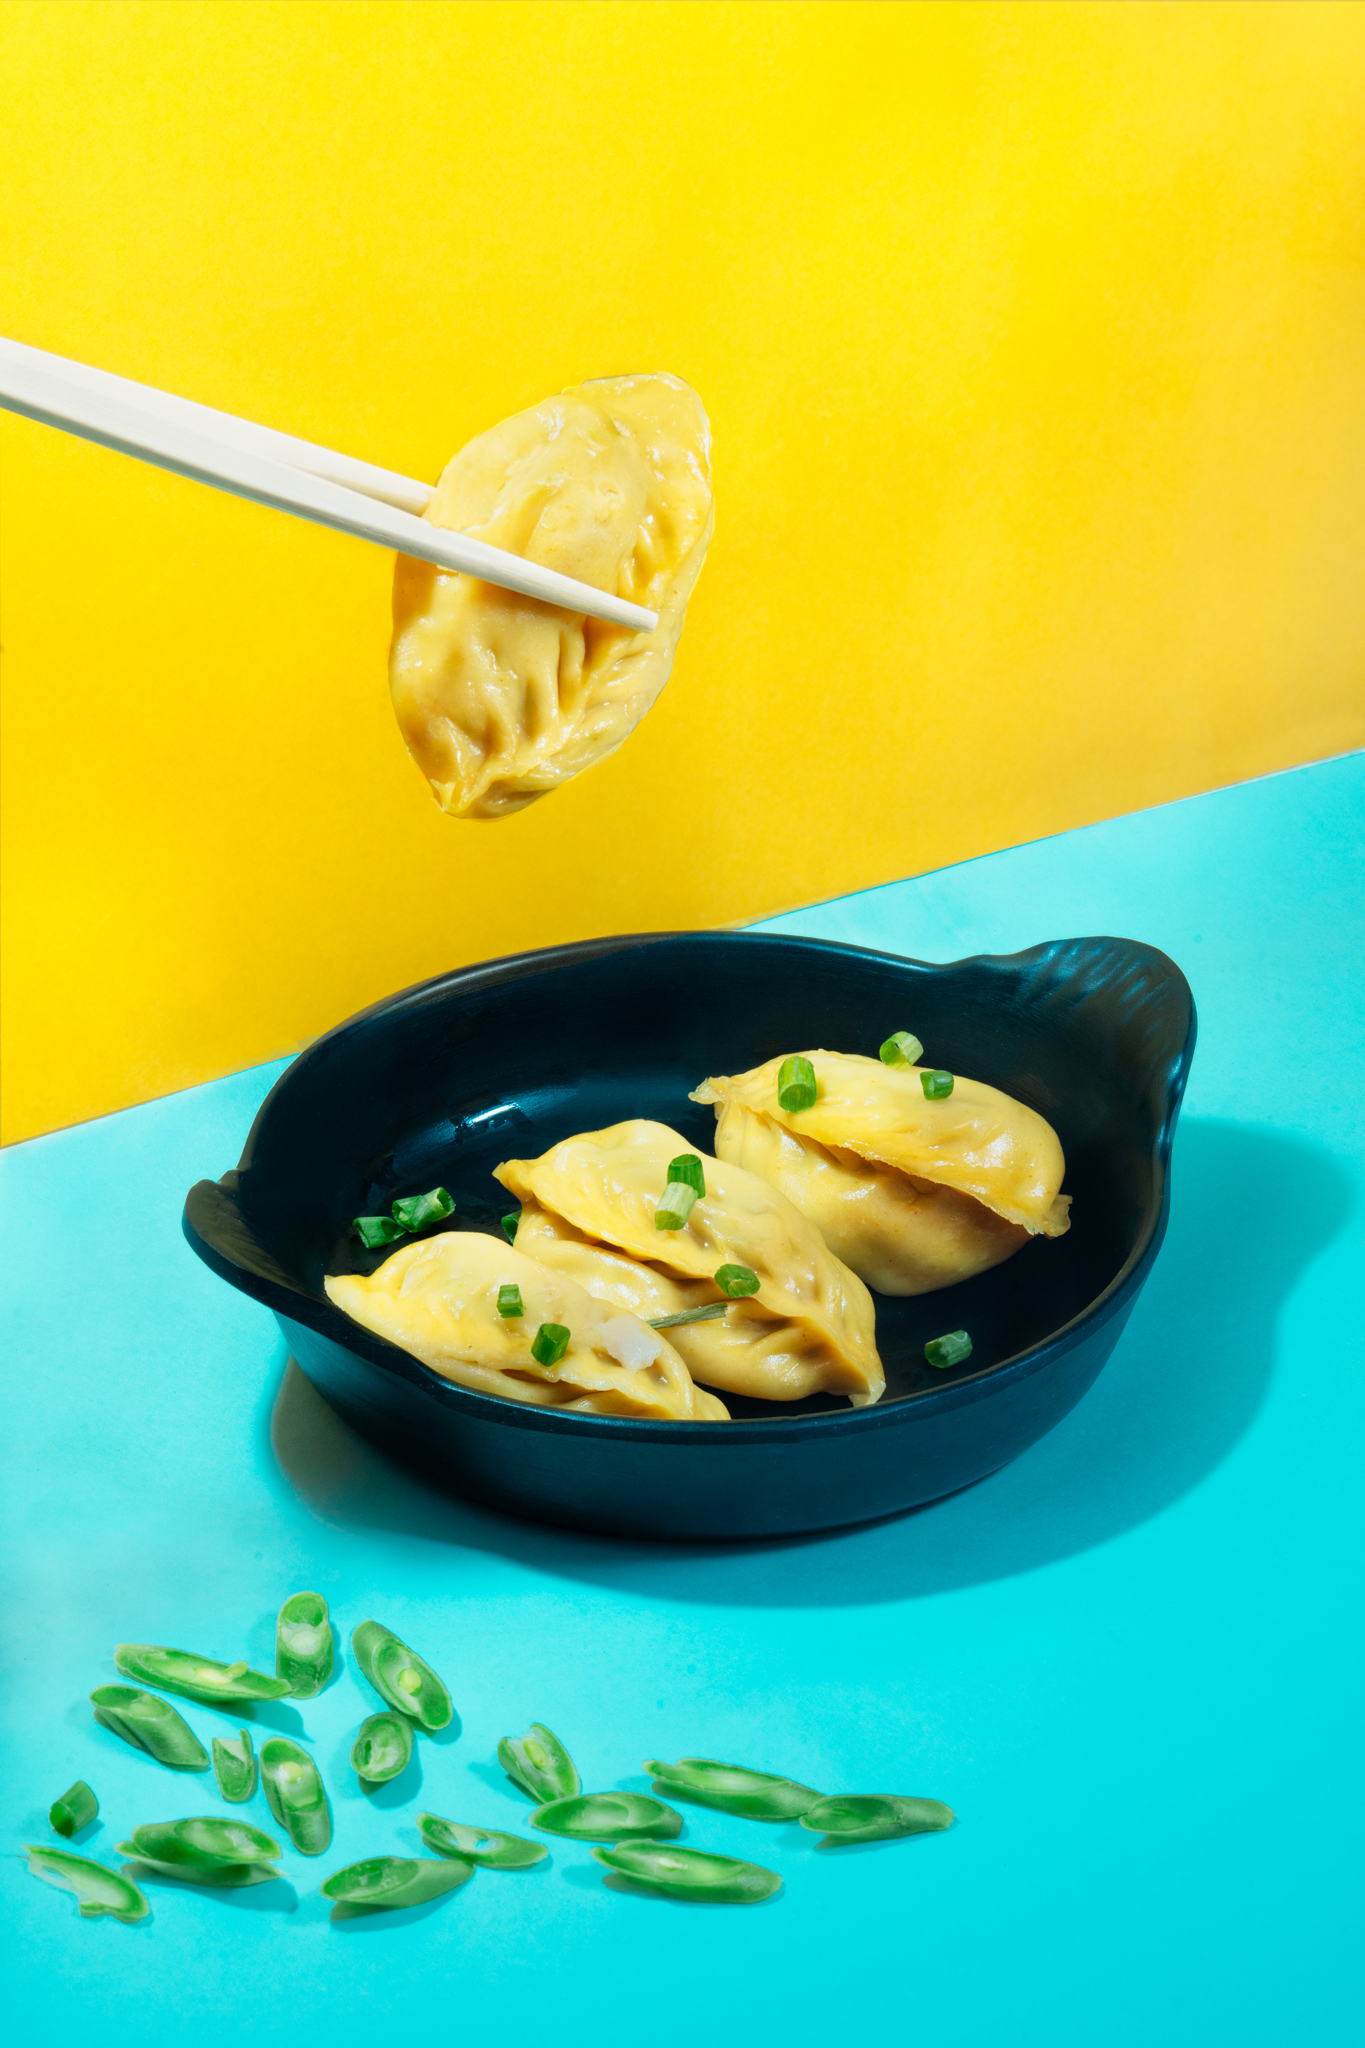 A close-up of a plate of jiaozi dumplings with chopsticks and green onions on a blue table